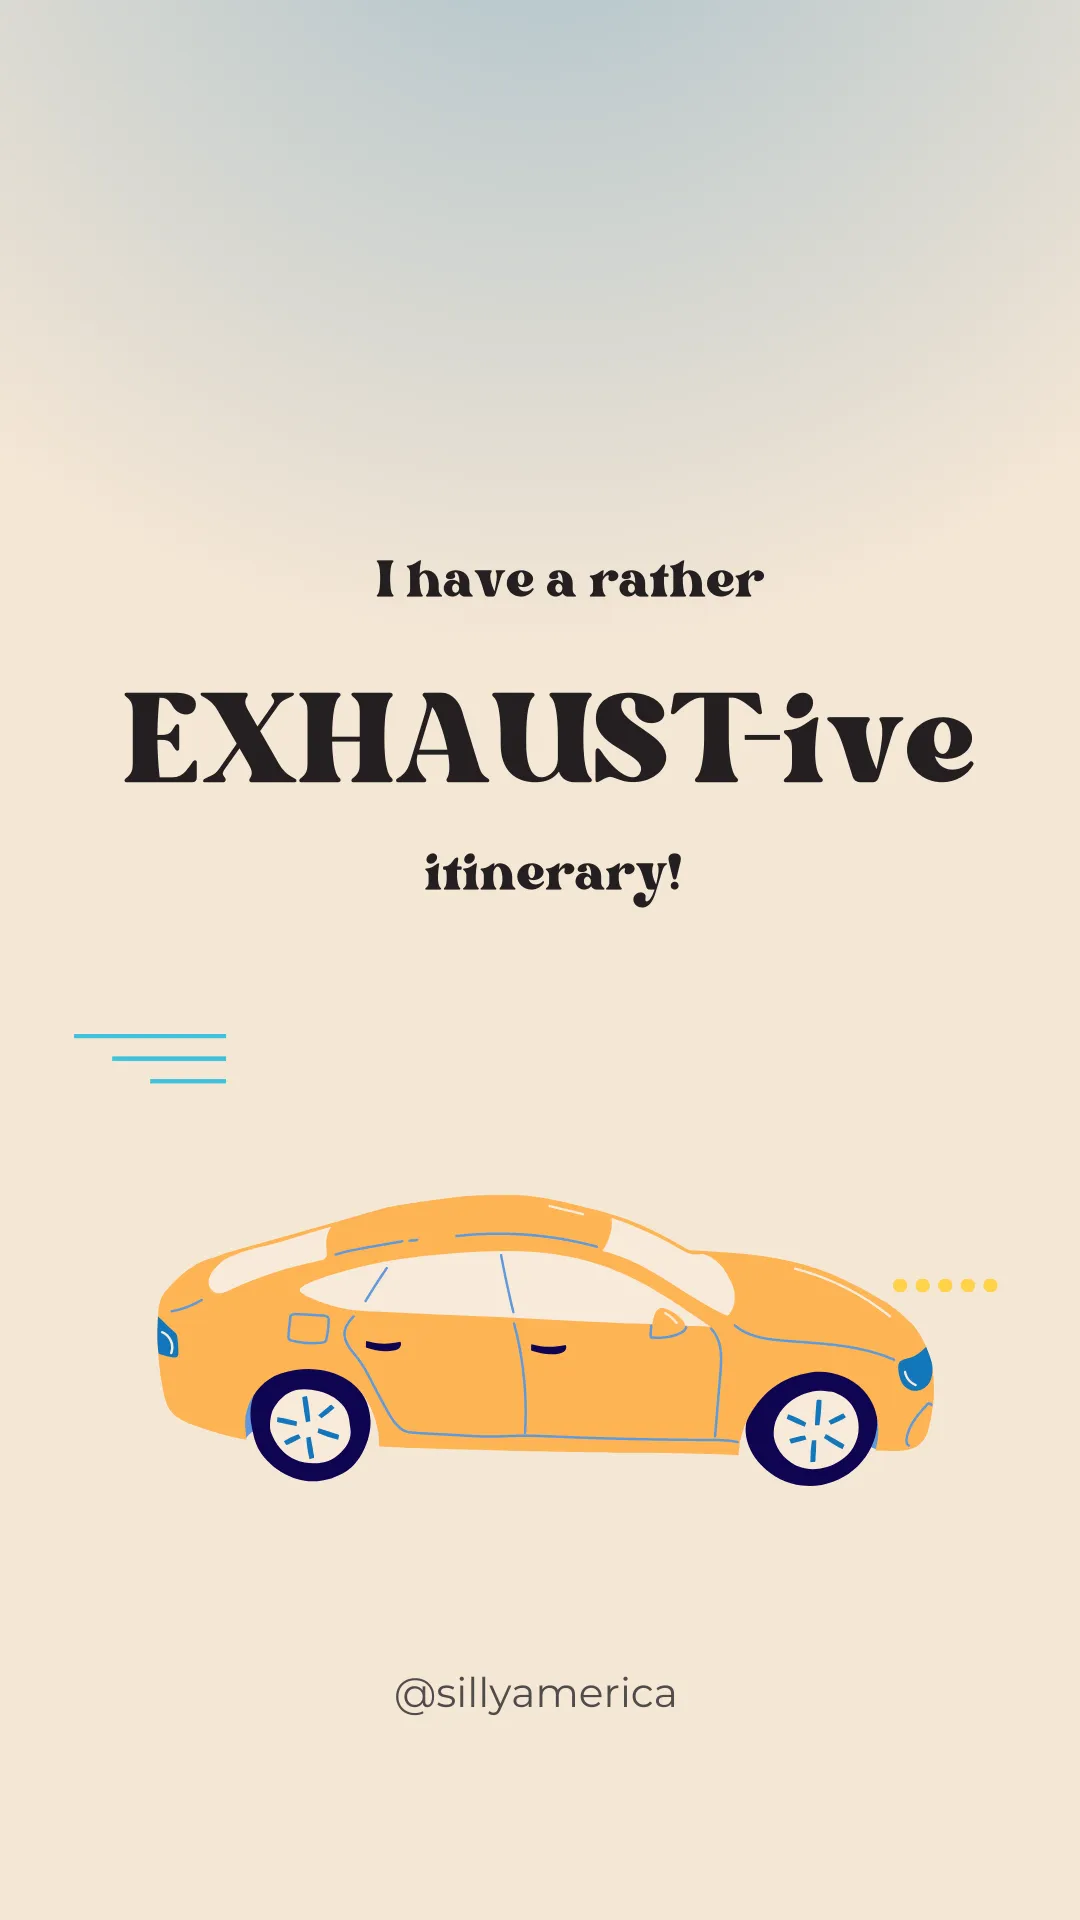 I have a rather EXHAUST-ive itinerary! - Road Trip Puns